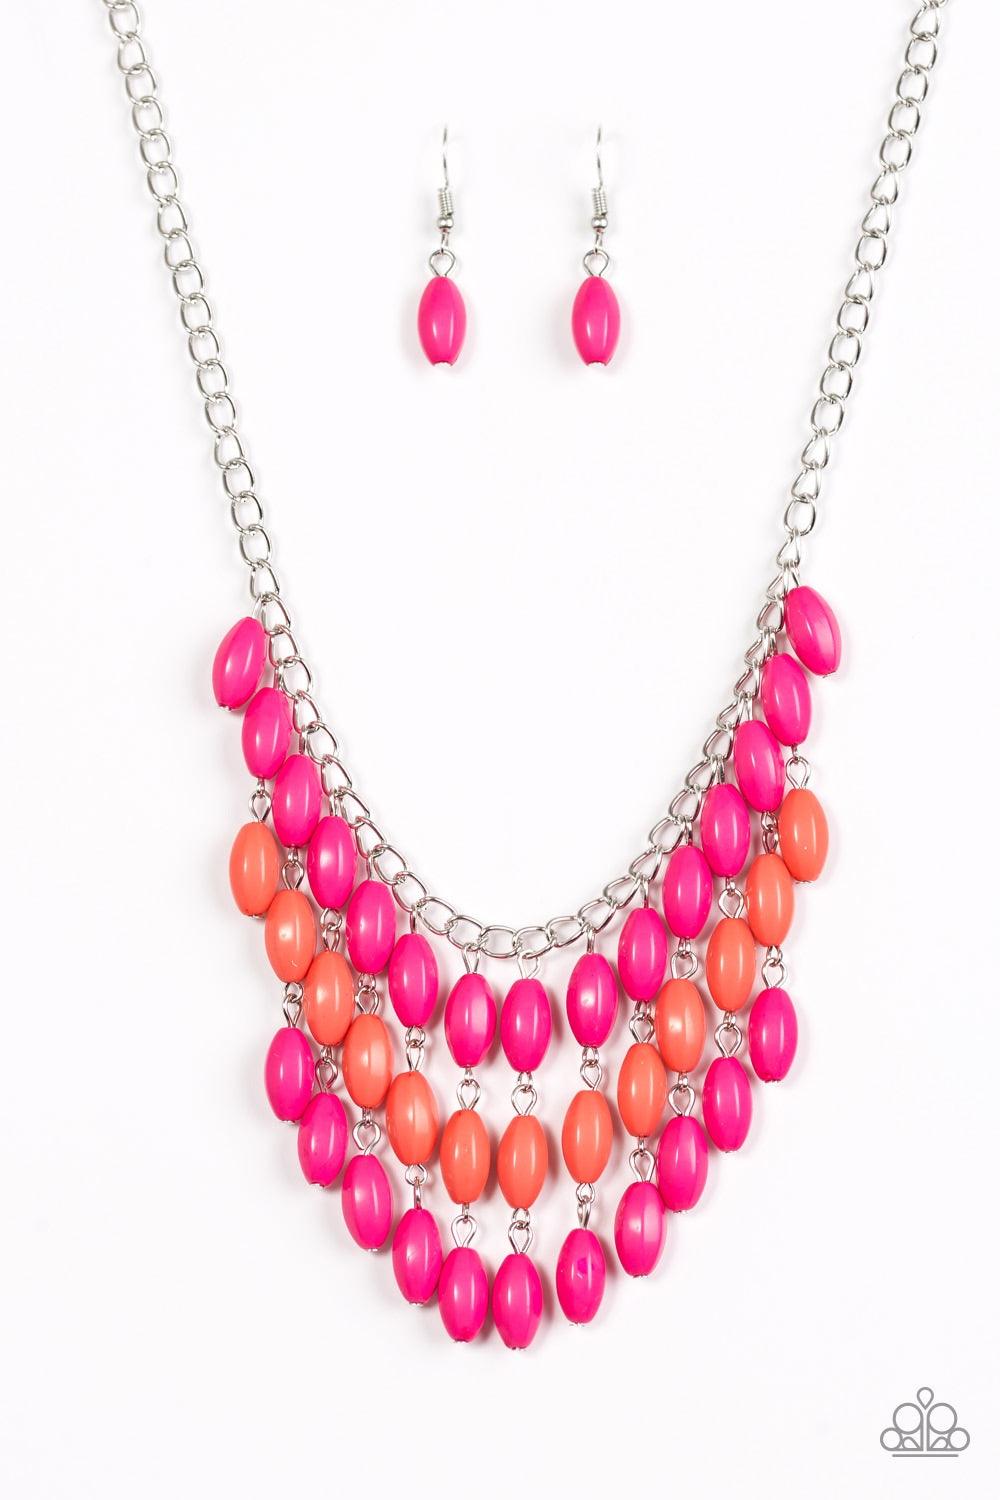 Paparazzi Accessories Delhi Diva - Pink Faceted pink and orange beads cascade from the bottom of a shimmery silver chain, creating a flirty fringe below the collar. Features an adjustable clasp closure. Jewelry